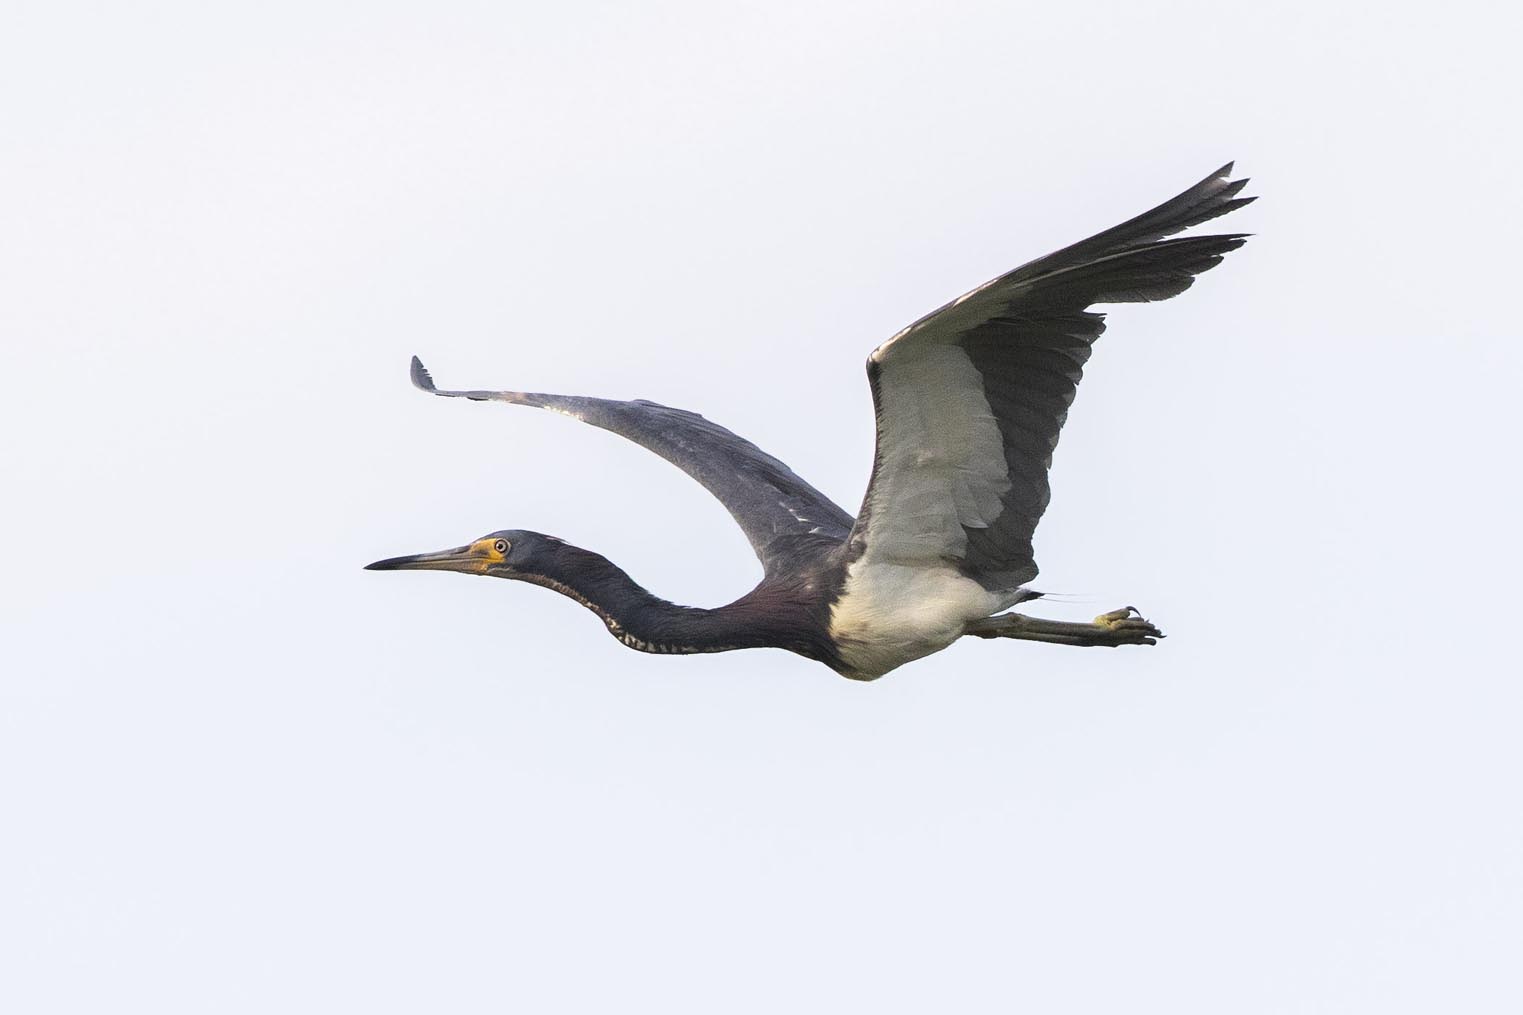 Tricolored Heron flying 1770s